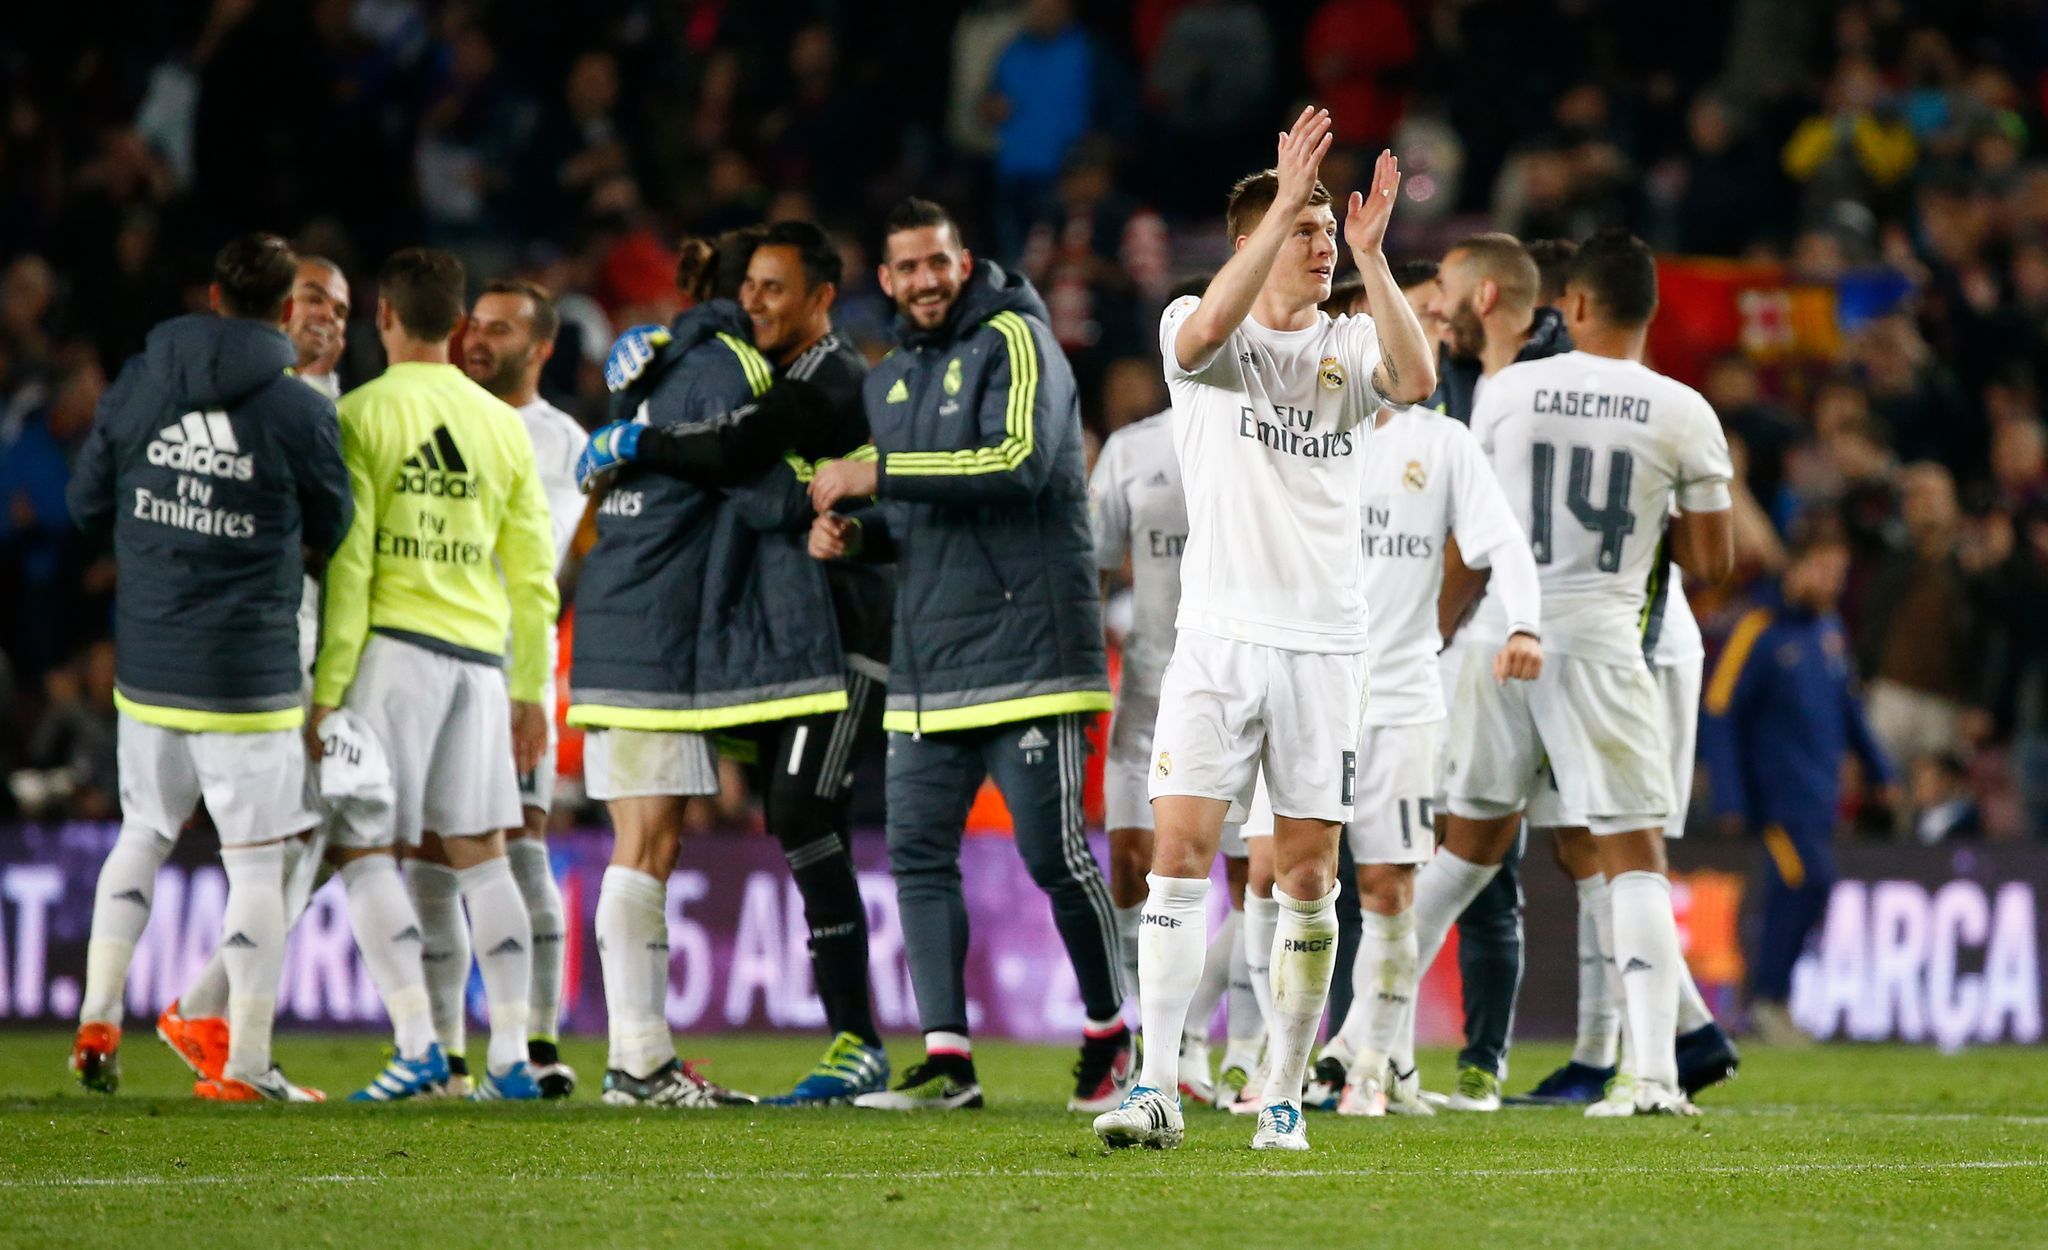 Real Madrid's Toni Kroos and teammates celebrate after the match